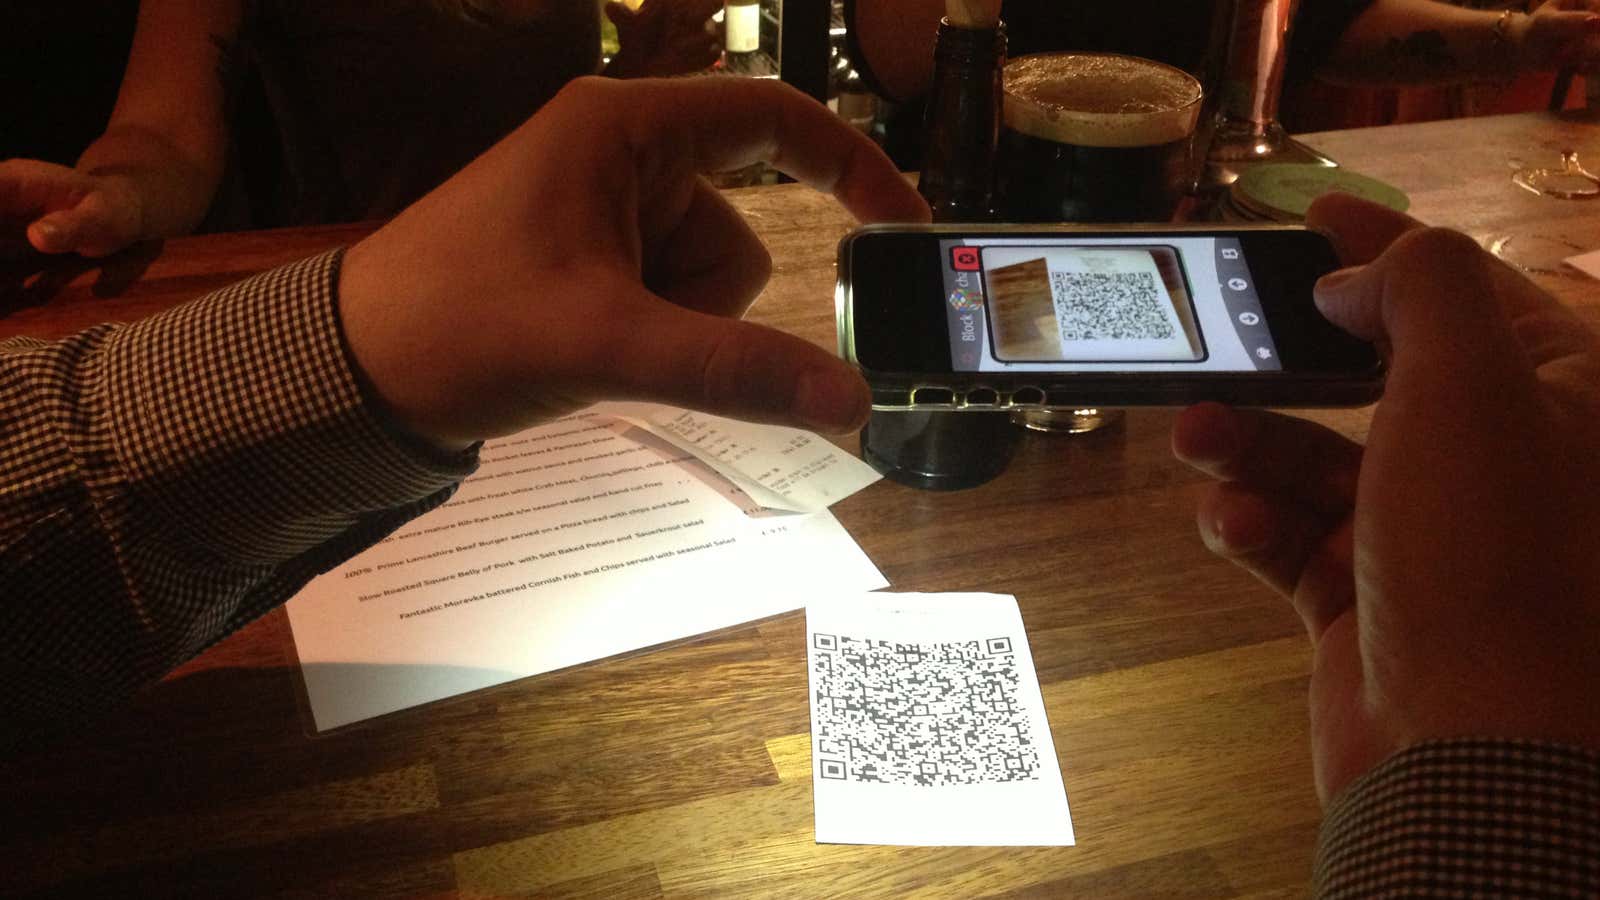 Paying for a pint with Bitcoin at the Pembury Tavern in east London.